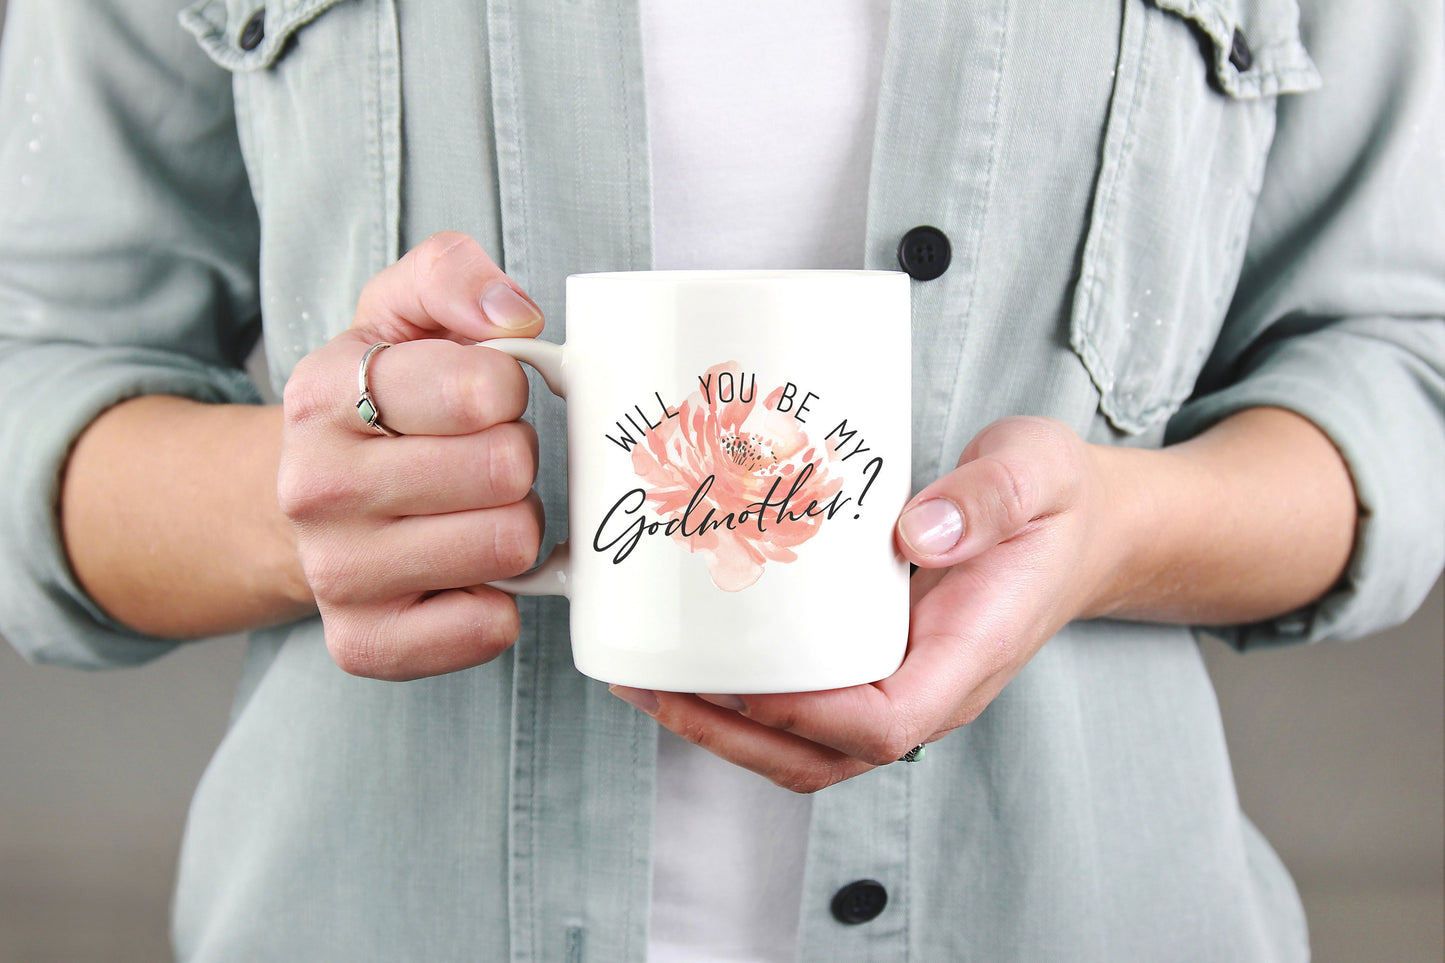 Will You Be My Godmother? Mug - Godmother Gift, Godmother Mug, Godparent Gift, Godmother Proposal, Baby Announcement